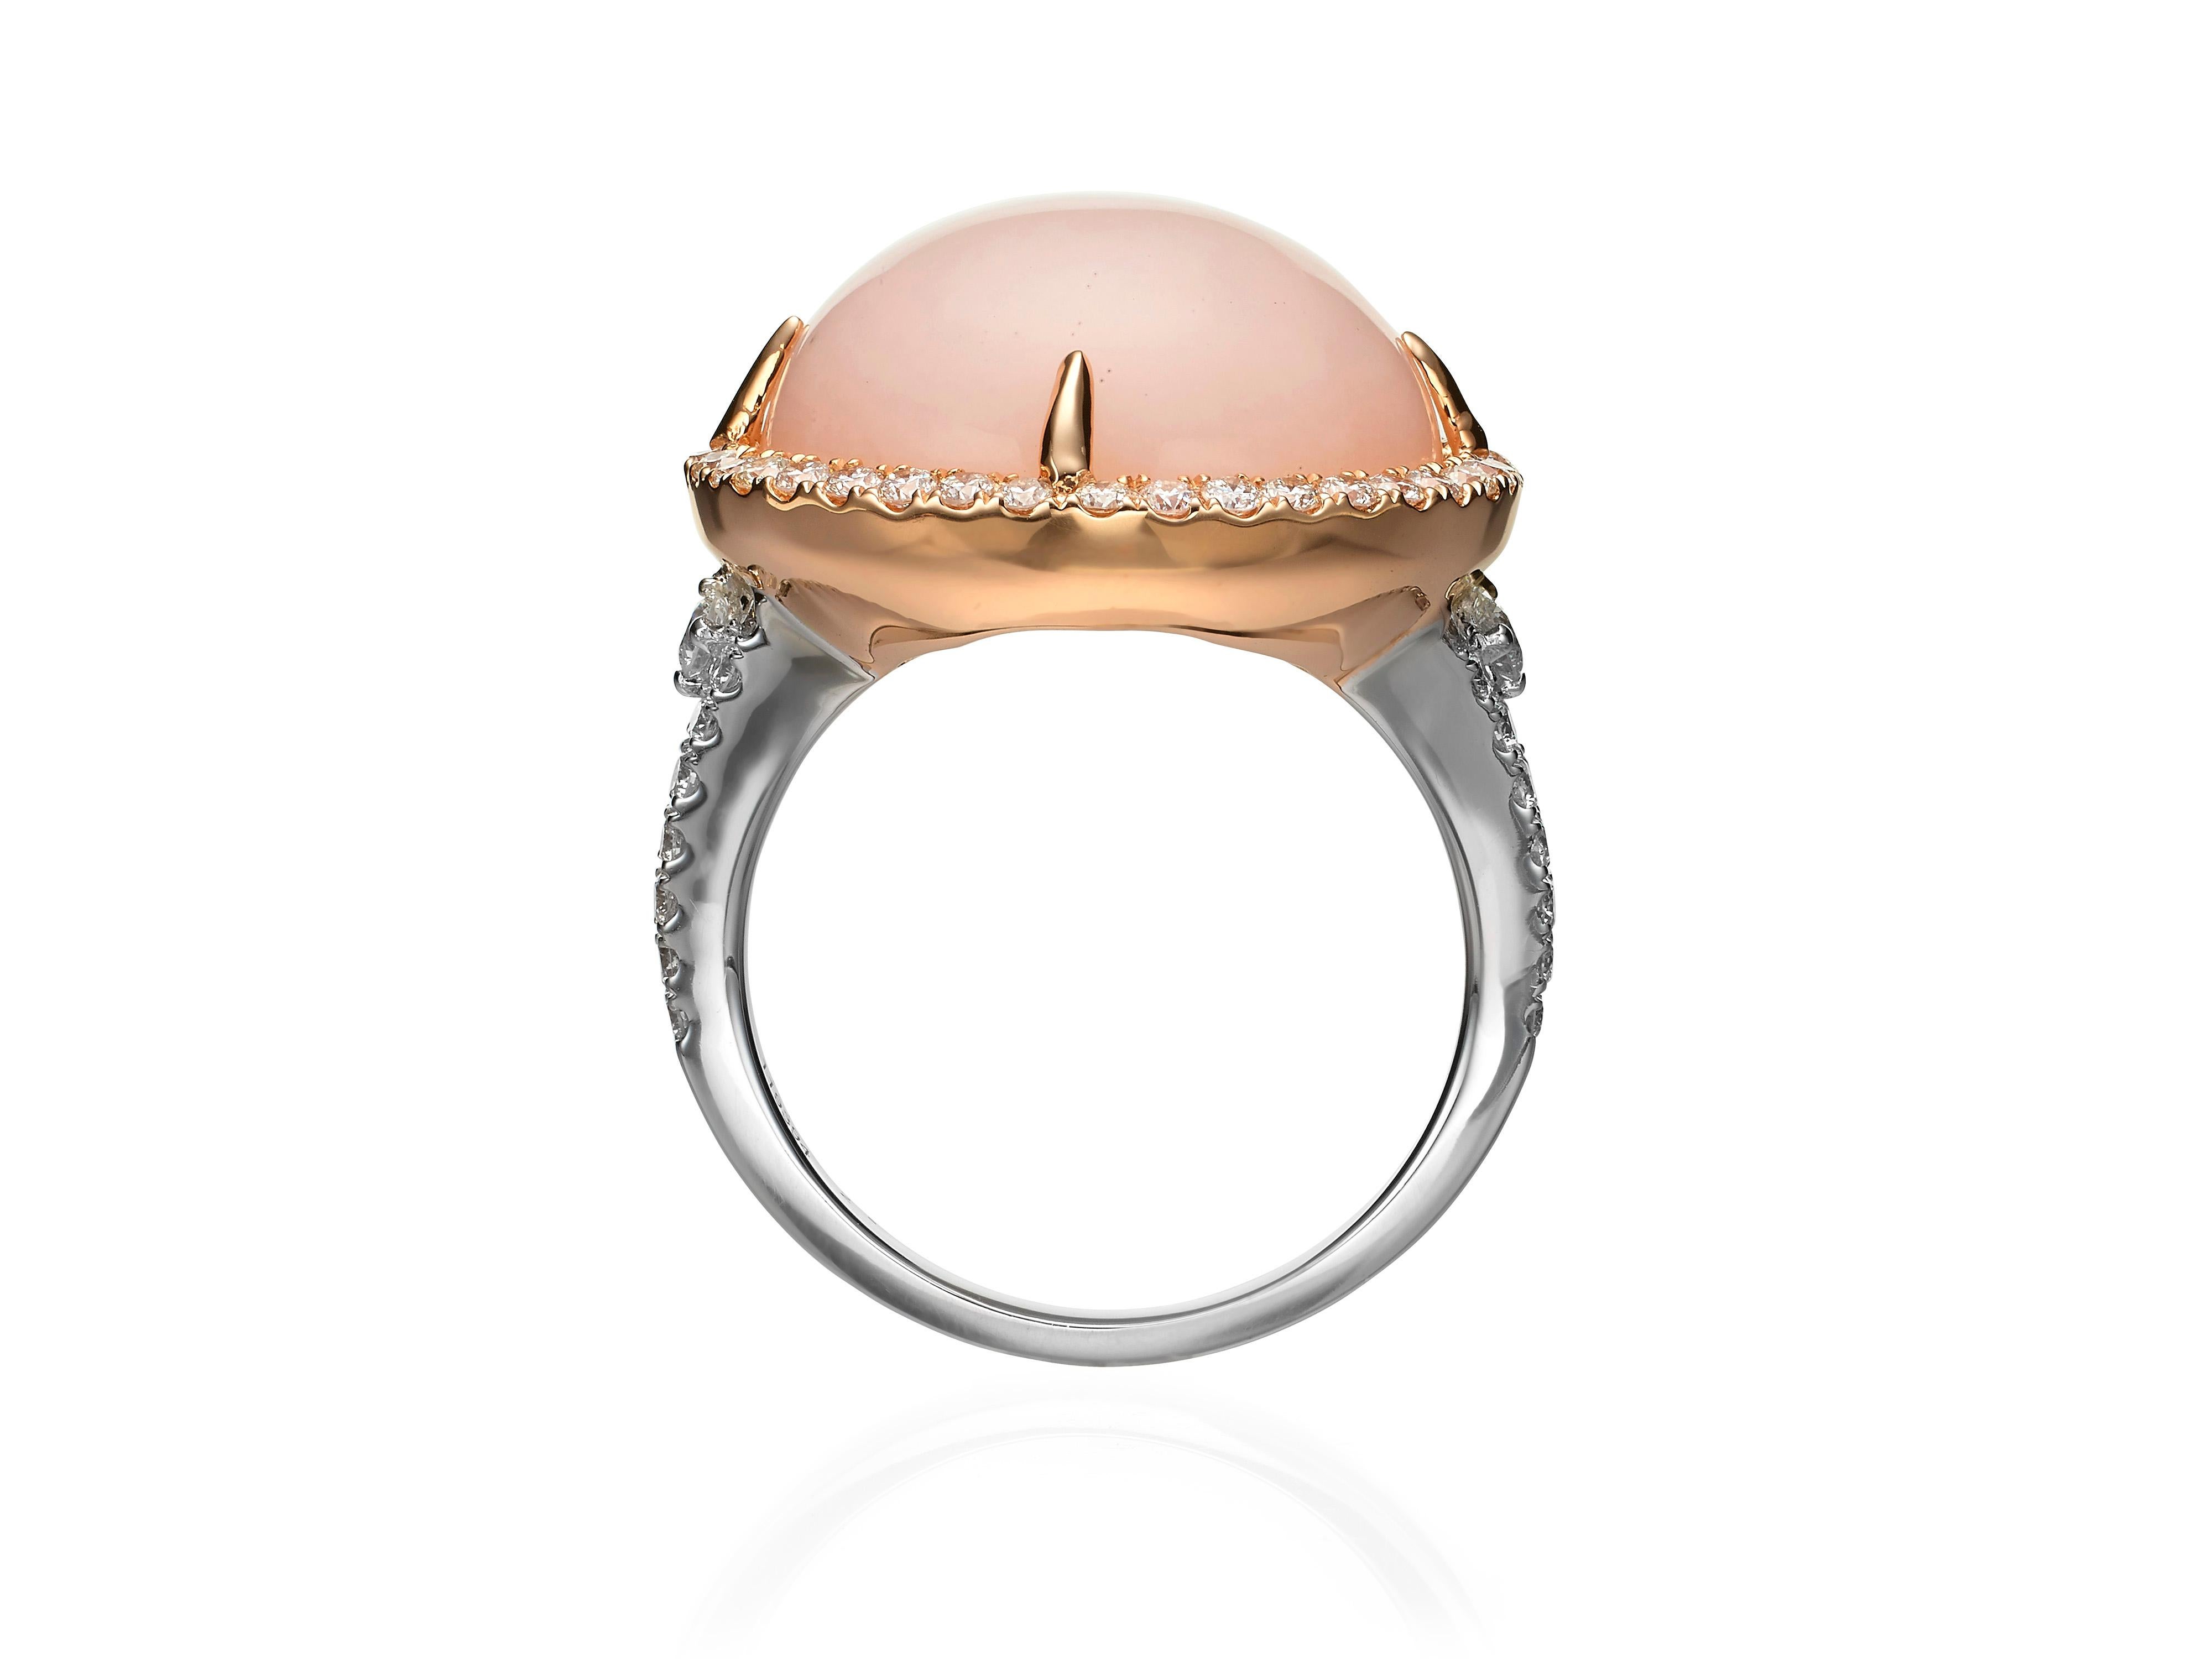 Crafted from 18K rose and white gold, this cocktail ring features a 13.91 carat pink opal surrounded by a halo of white diamonds set in rose gold and white diamonds set in white gold on the band (totaling 1.12 carats).  Currently a ring size US 8.5.